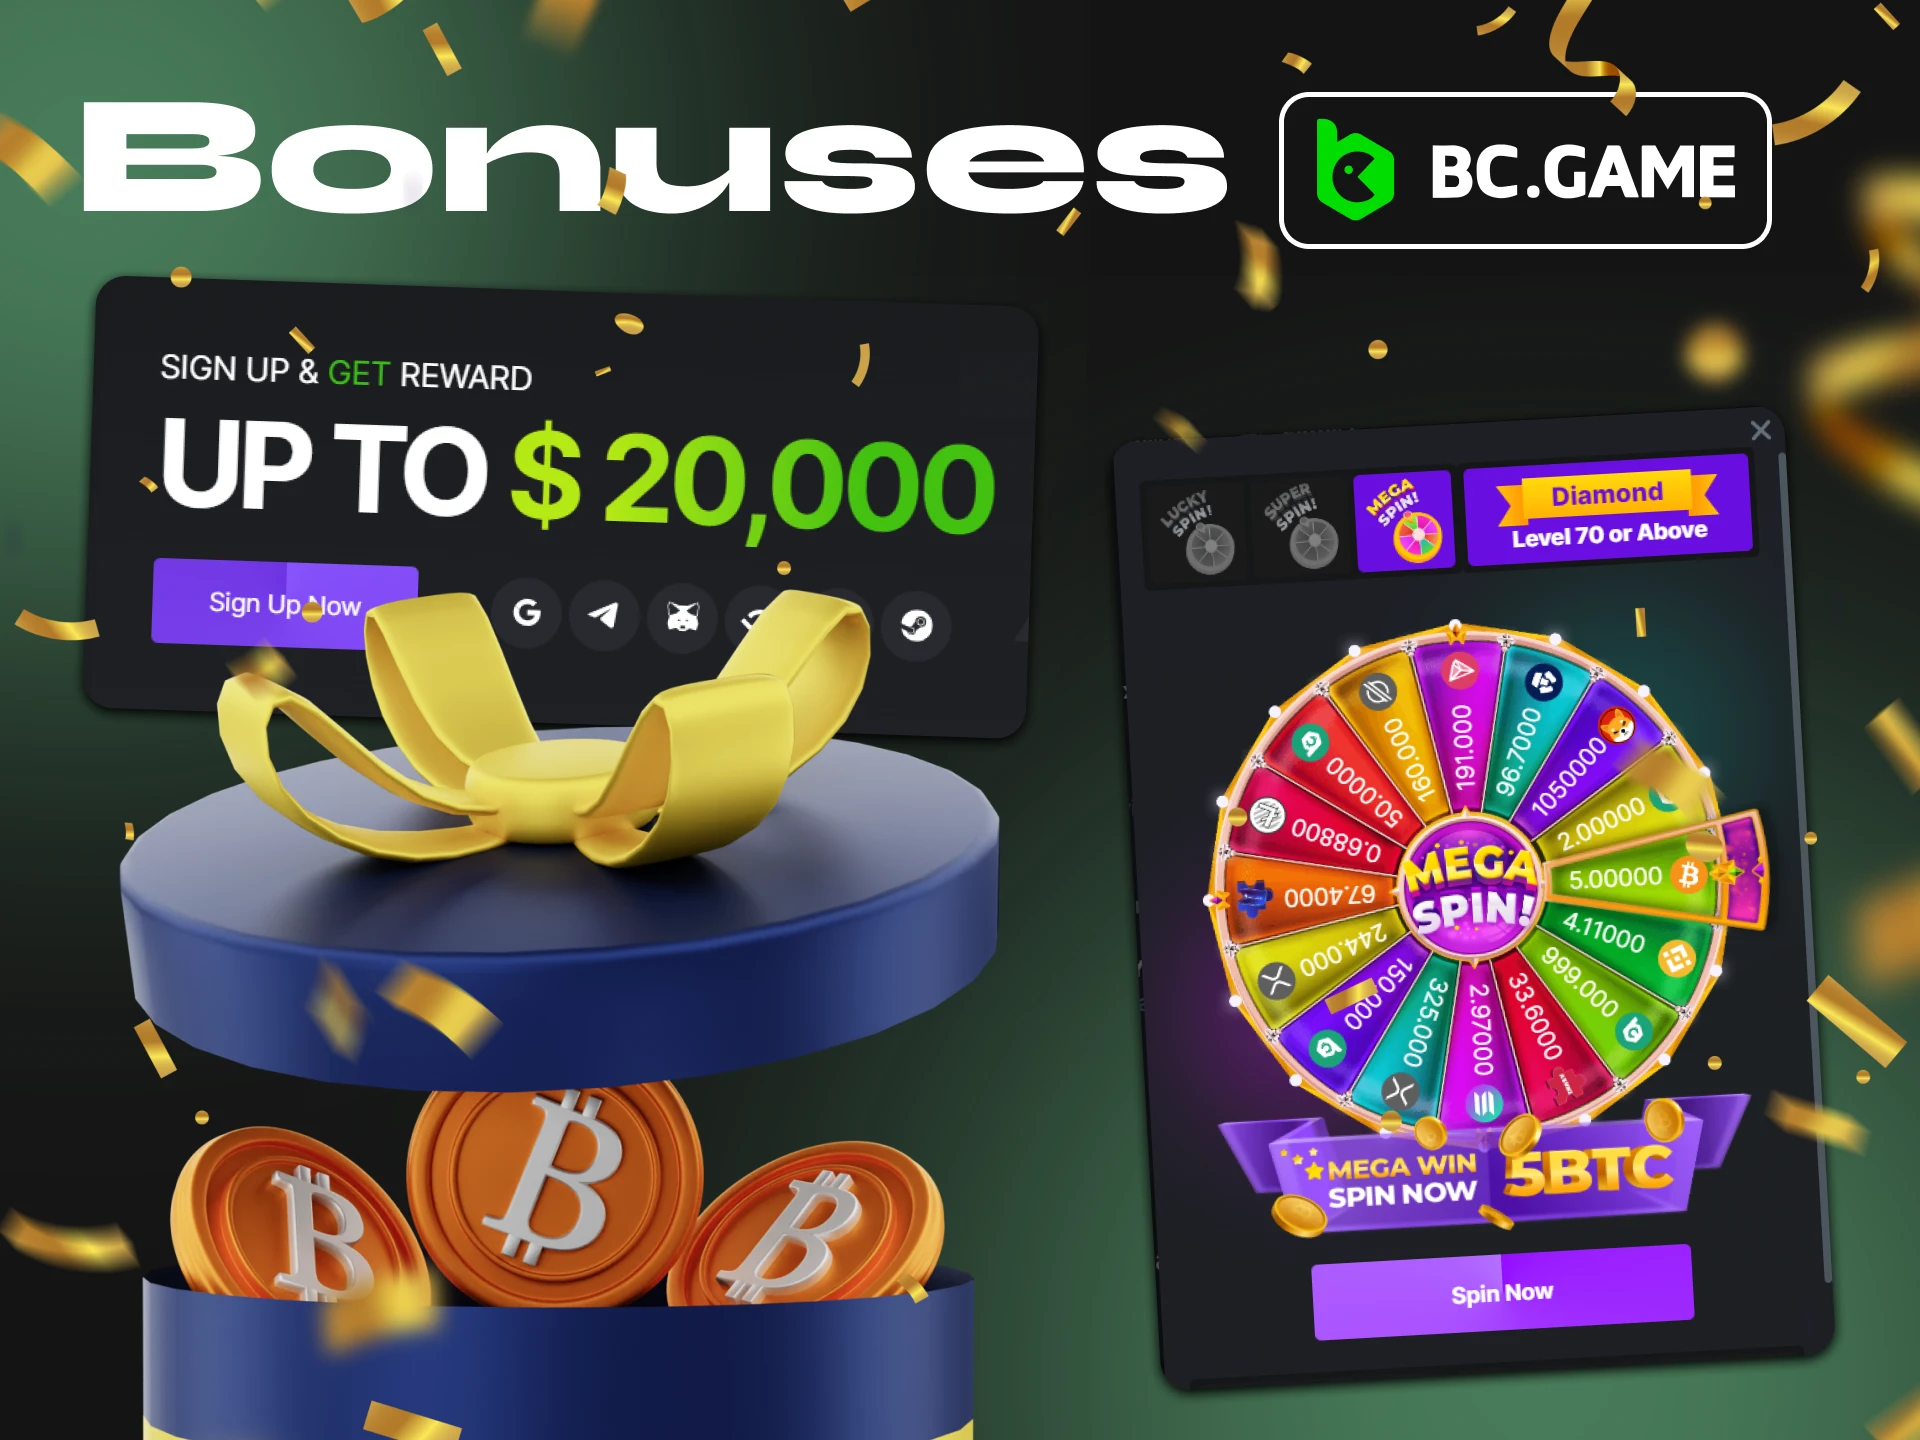 BC.game crypto casino offers a wide variety of bonuses to suit every taste.